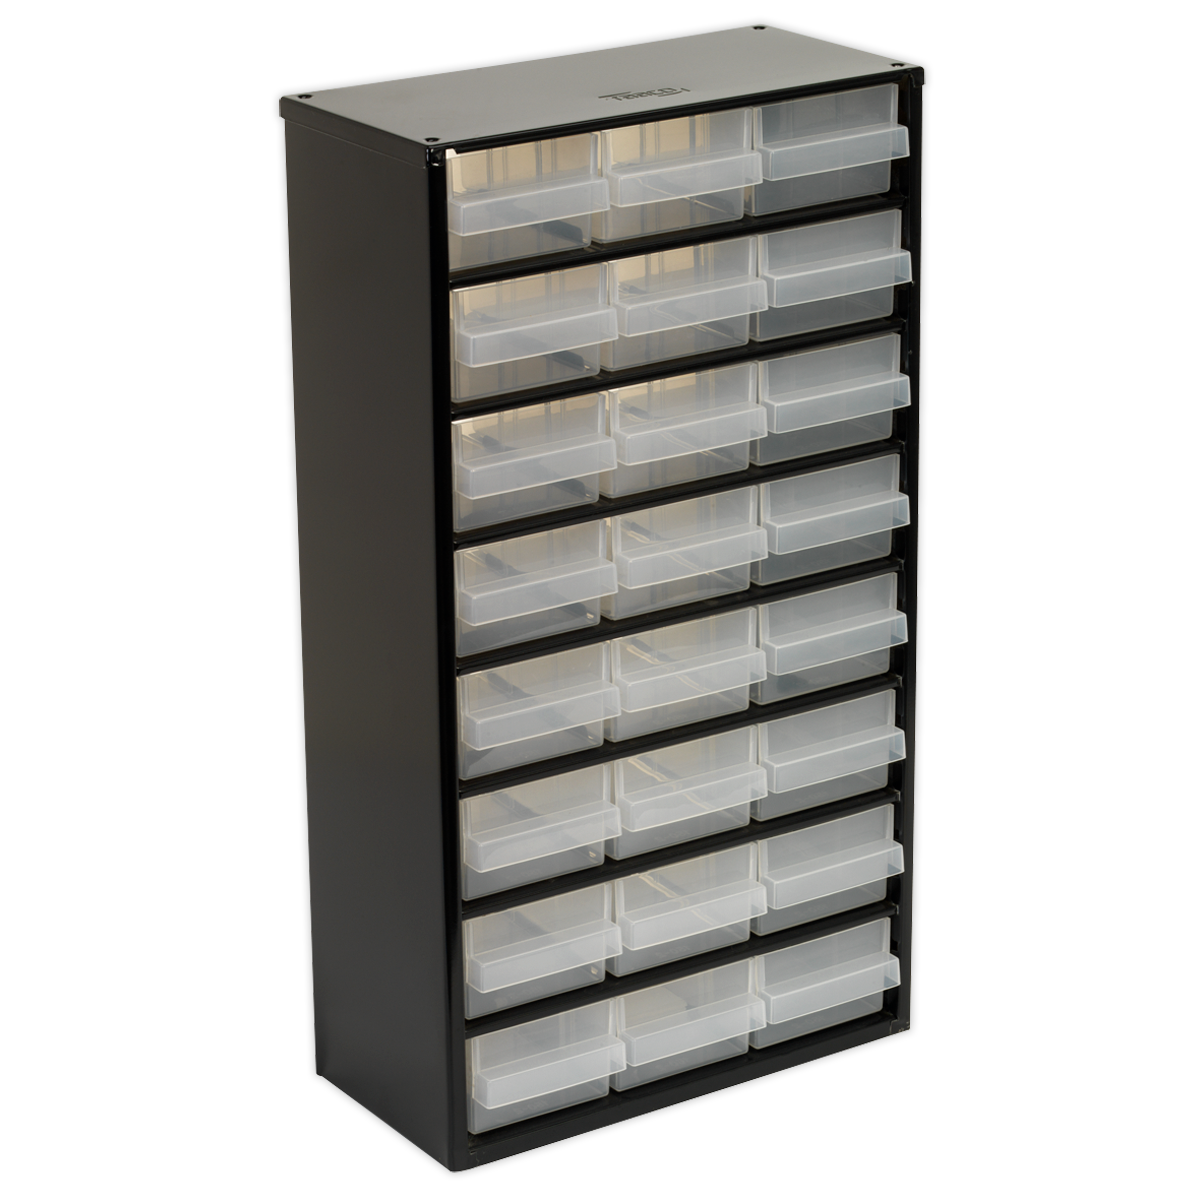 SEALEY - APDC24 Cabinet Box 24 Drawer